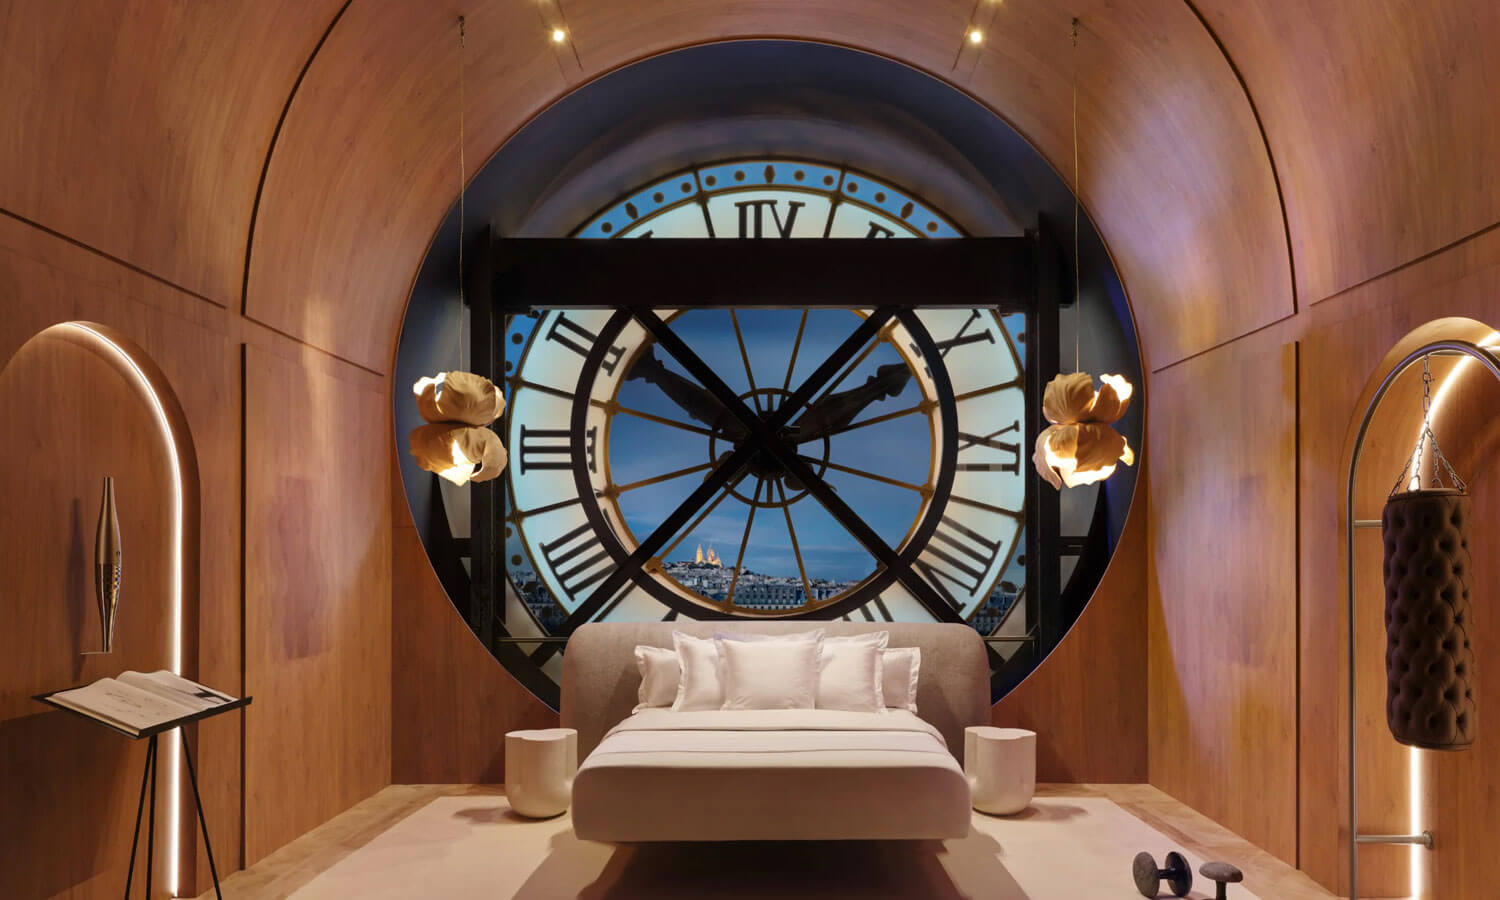 In the clock tower room of the Musée d'Orsay